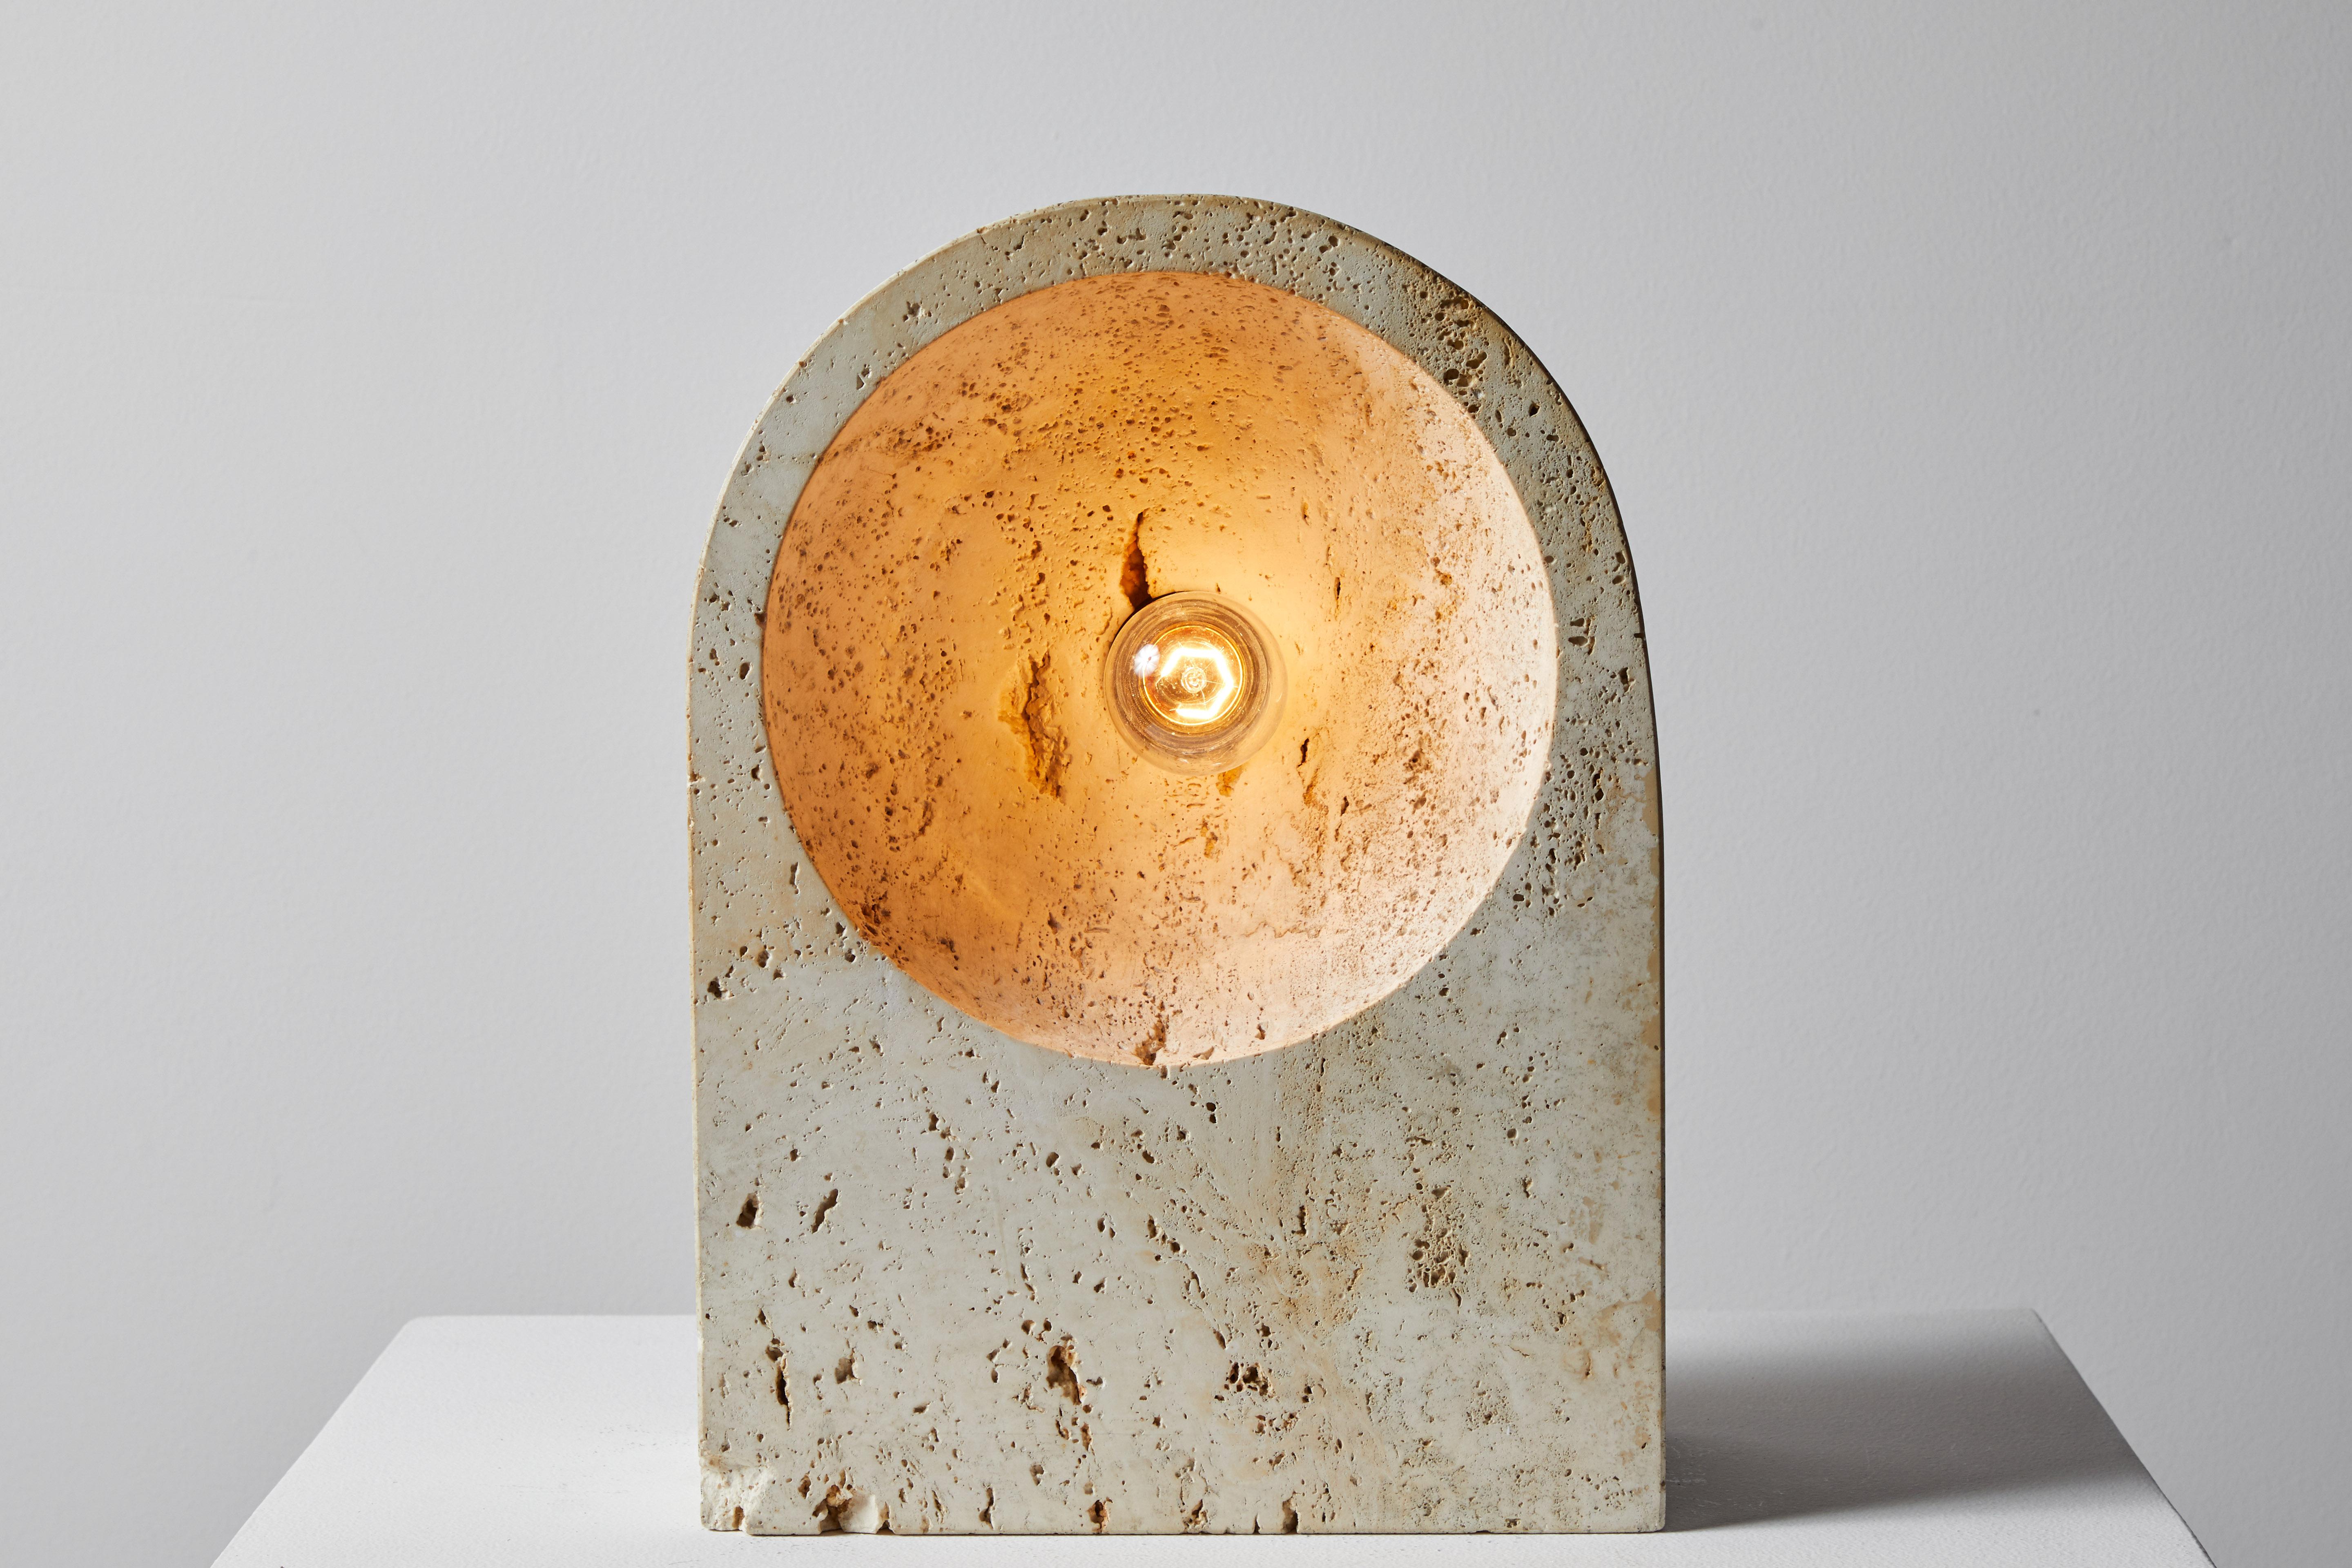 'Maja' table lamp by Giuliano Cesari for Nucleo Sormani. Designed and manufactured in Italy, 1969. Travertine, original cord. Retains original manufacturer's label. Takes one E27 75 w maximum Edison bulb. Bulbs provided as a one time